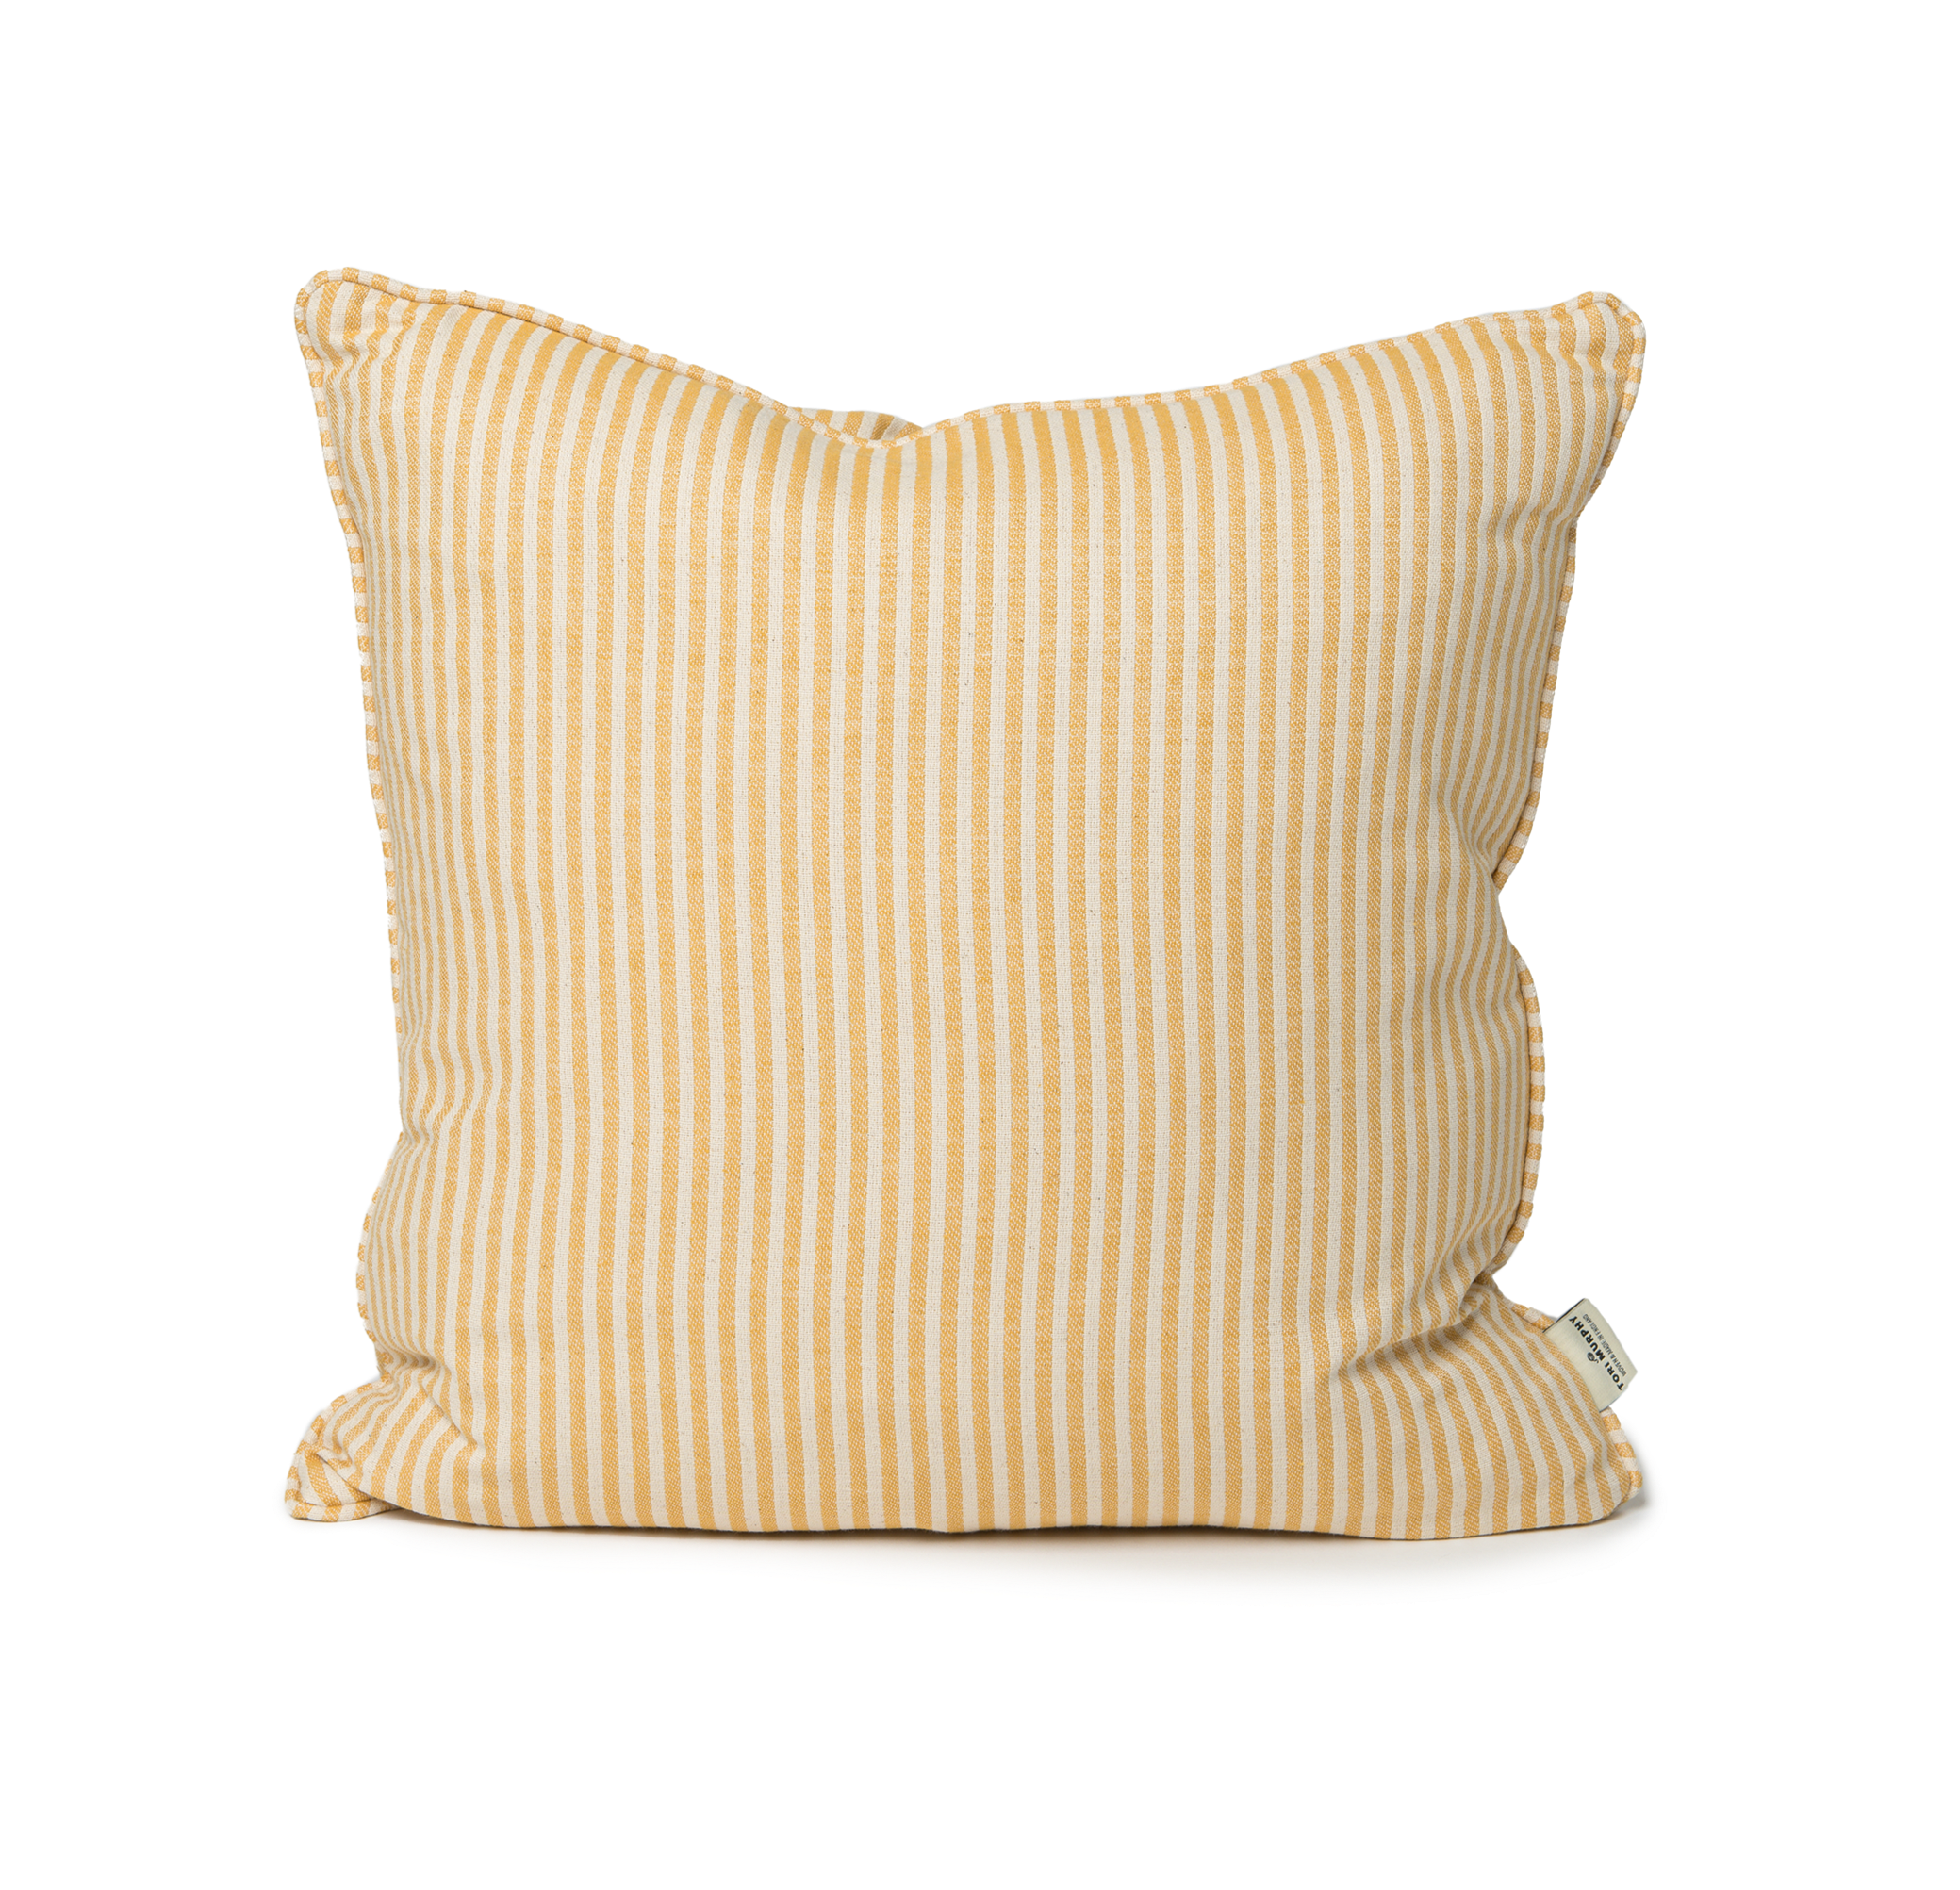 Harbour Stripe Piped Cushion Mustard